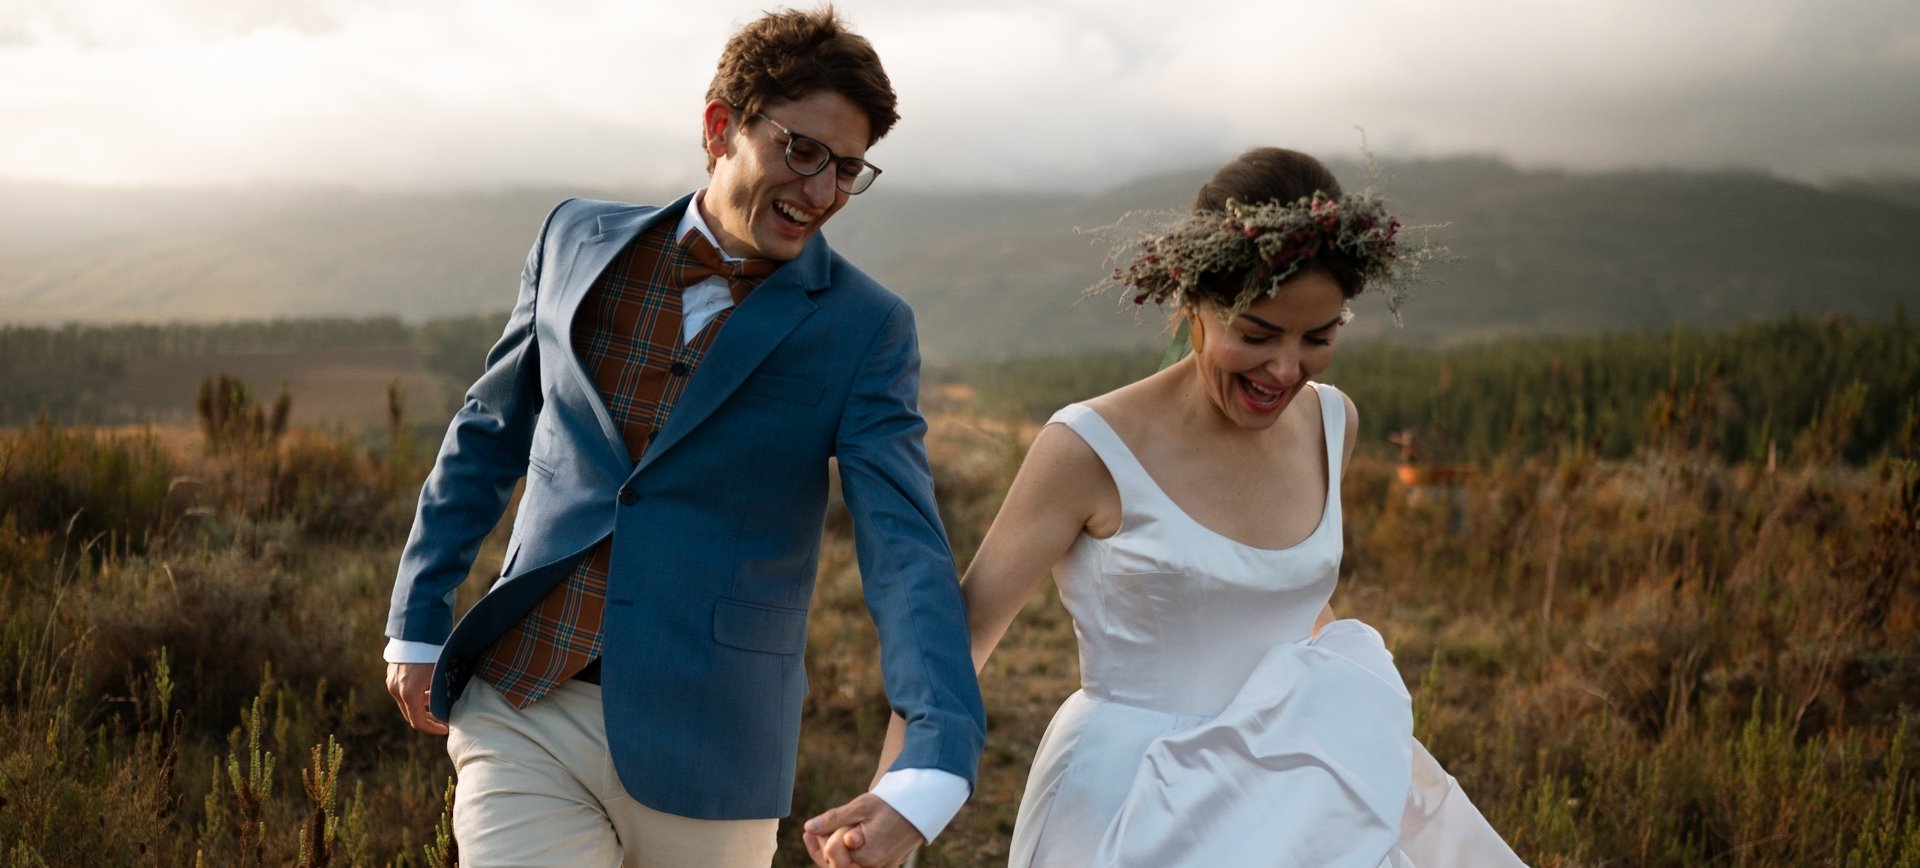 City Elopement Wedding in South Africa